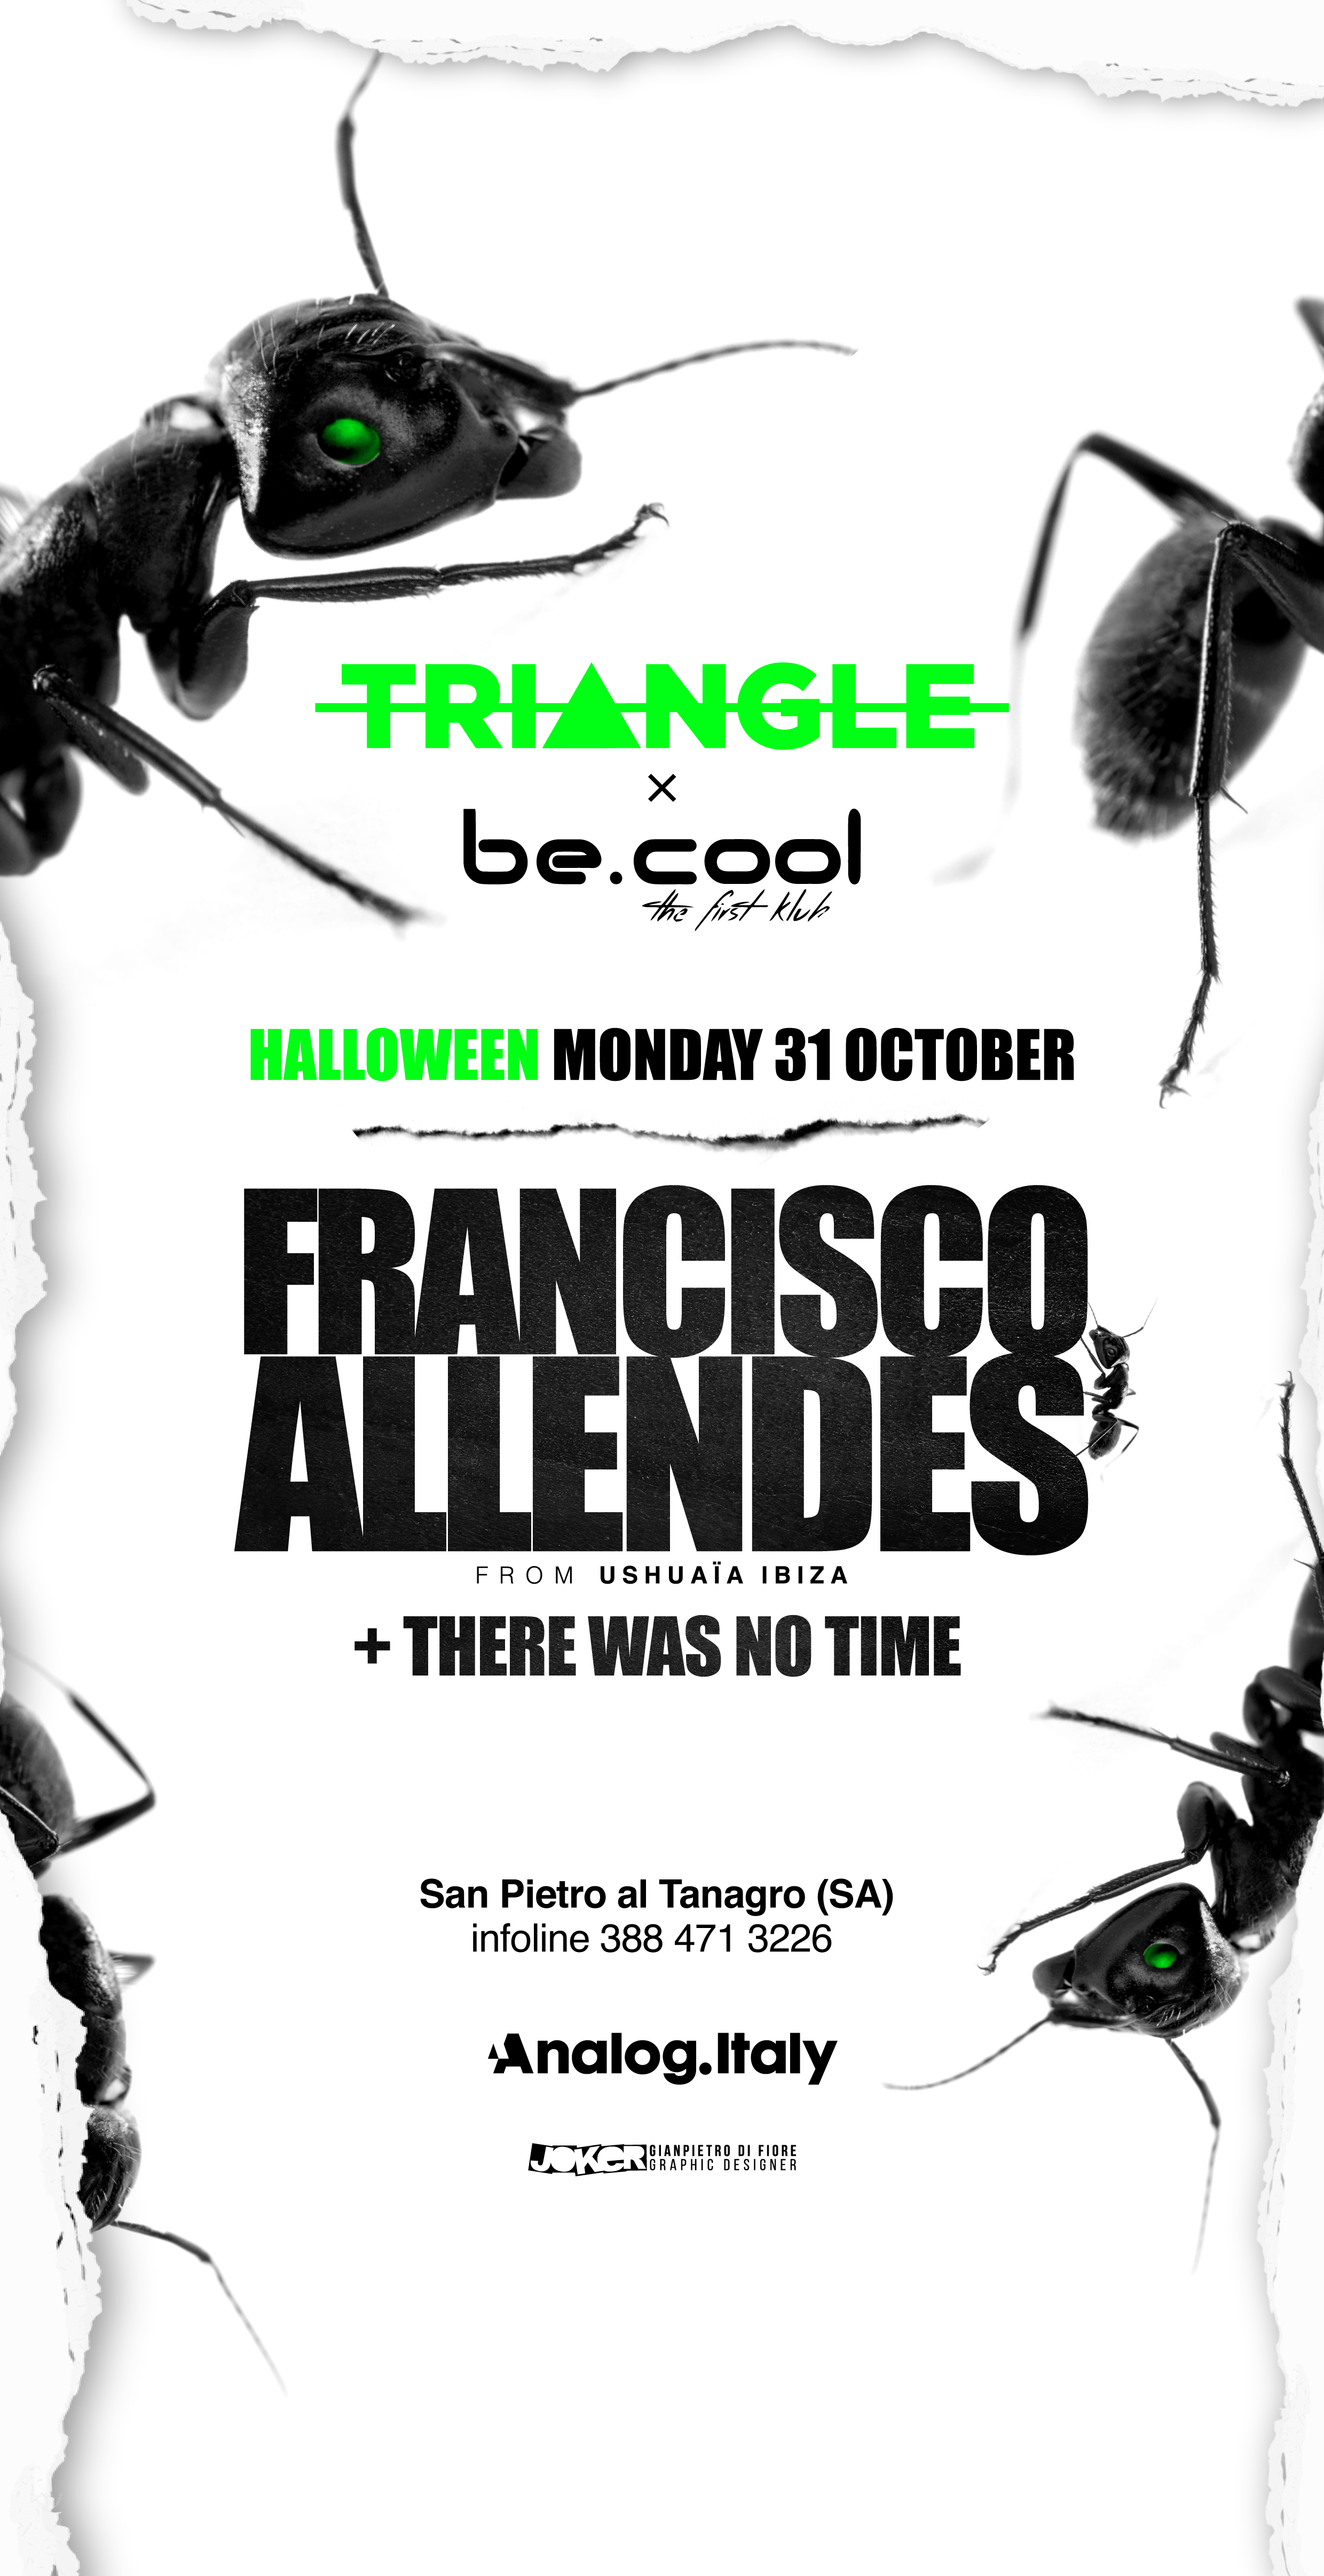 TRIANGLE OPENING PARTY - Francisco Allendes + THERE WAS NO TIME - Página frontal